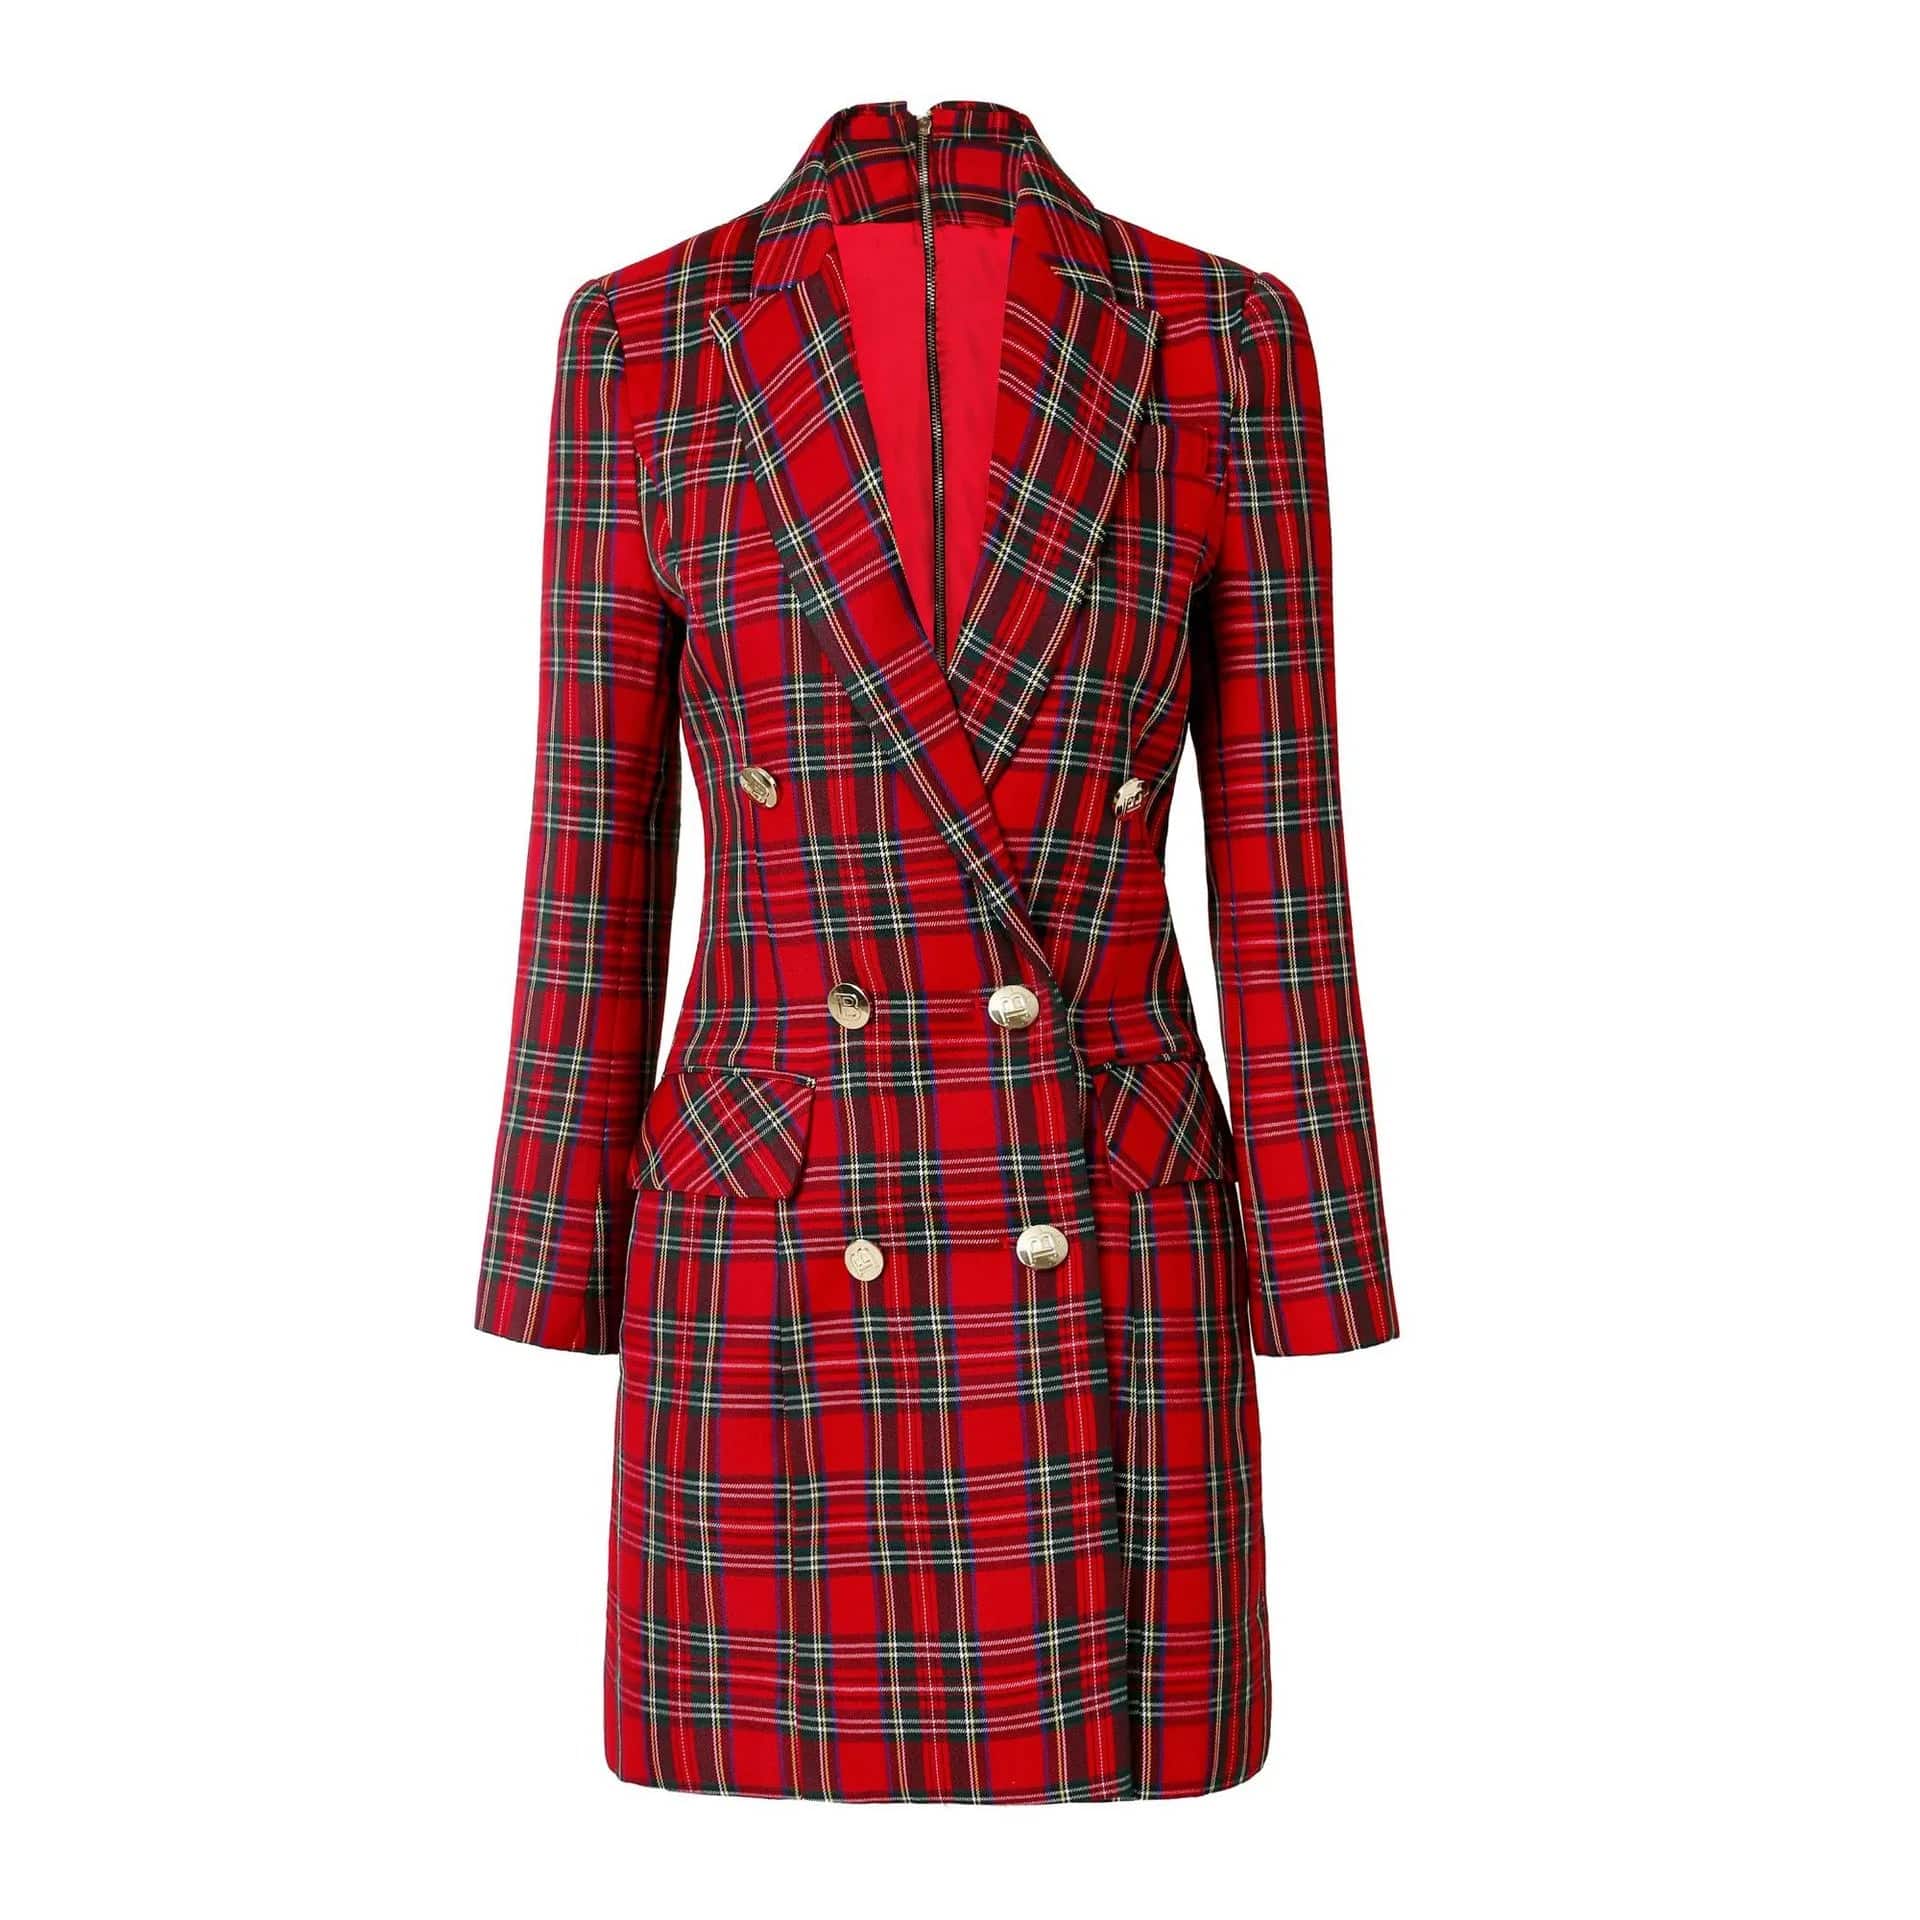 Red Plaid Blazer Dress For Women - Veronica Luxe